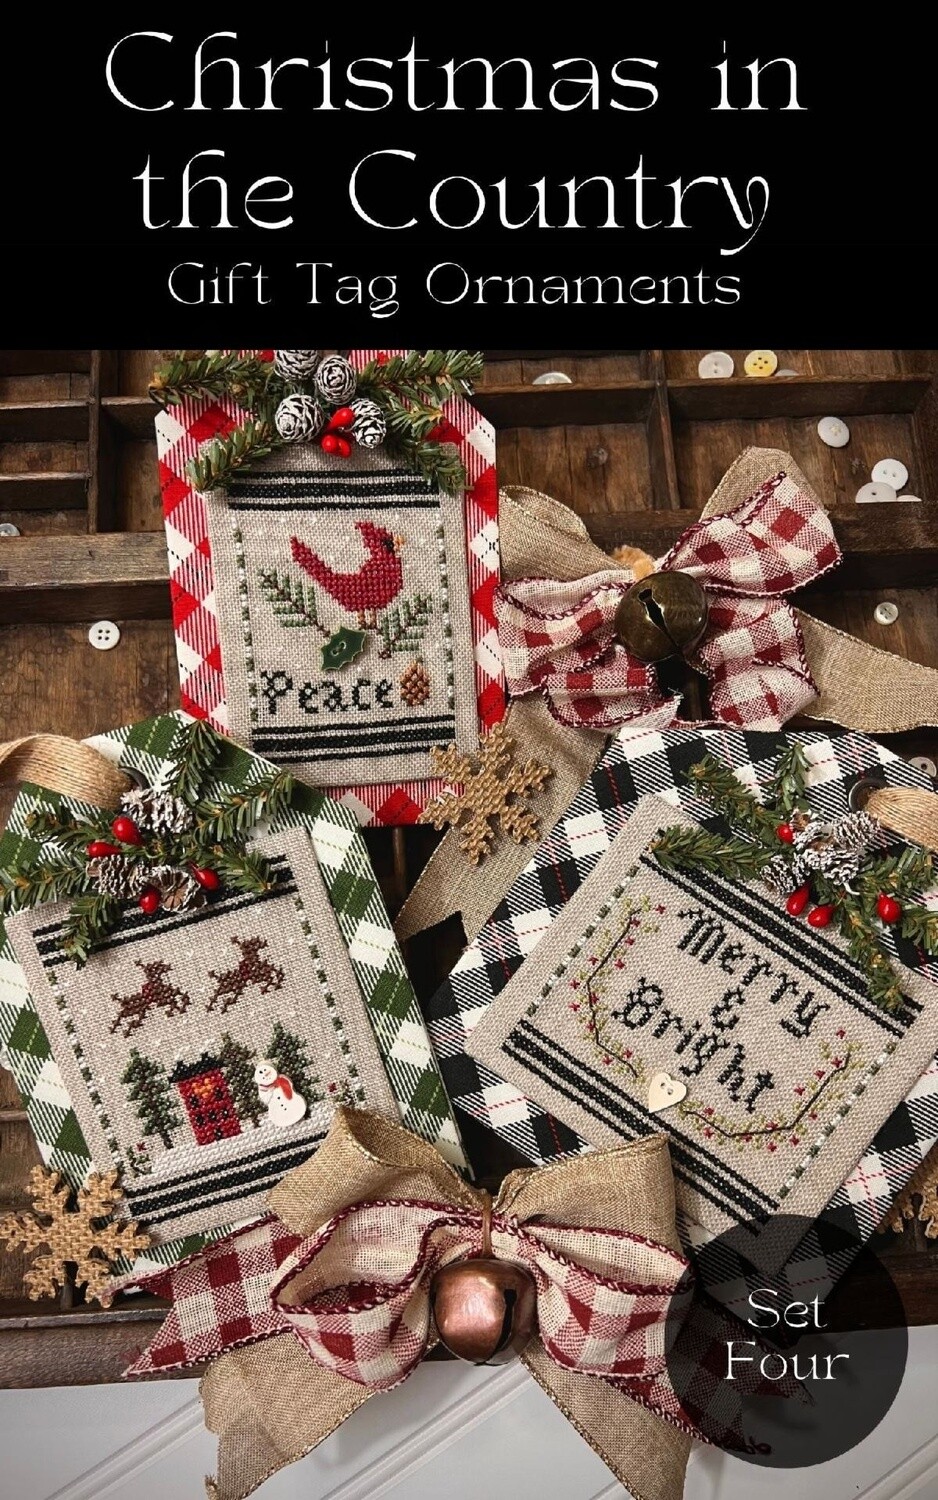 Christmas in the Country - Gift Tag Ornaments - Set 4